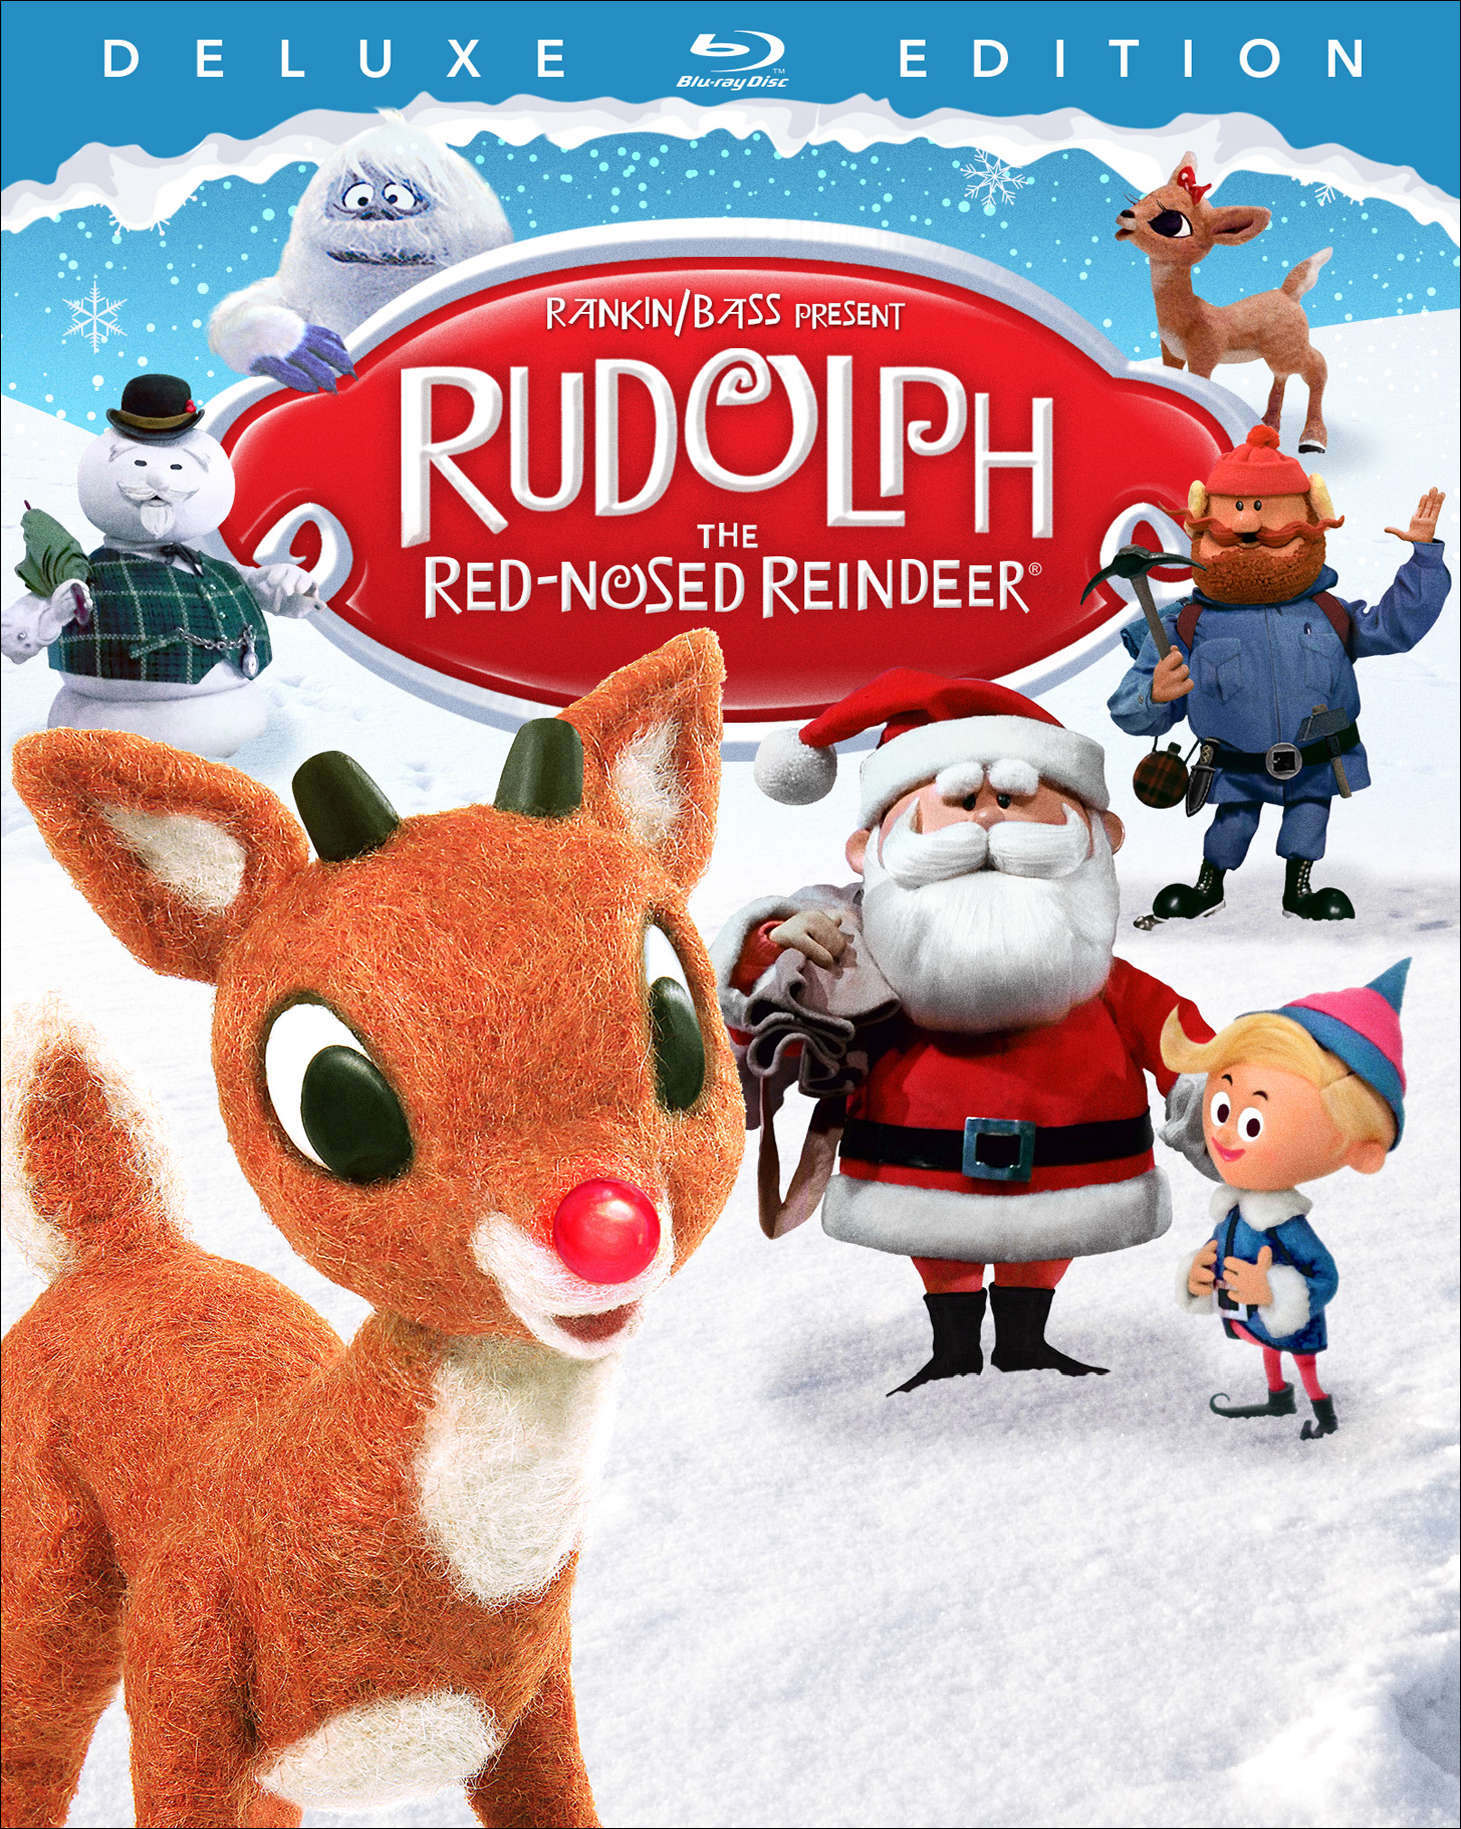 Rudolph The Red-Nosed Reindeer [Deluxe Edition] [Blu-Ray] [1964] in Rudolph And The Red Nosed Reindeer